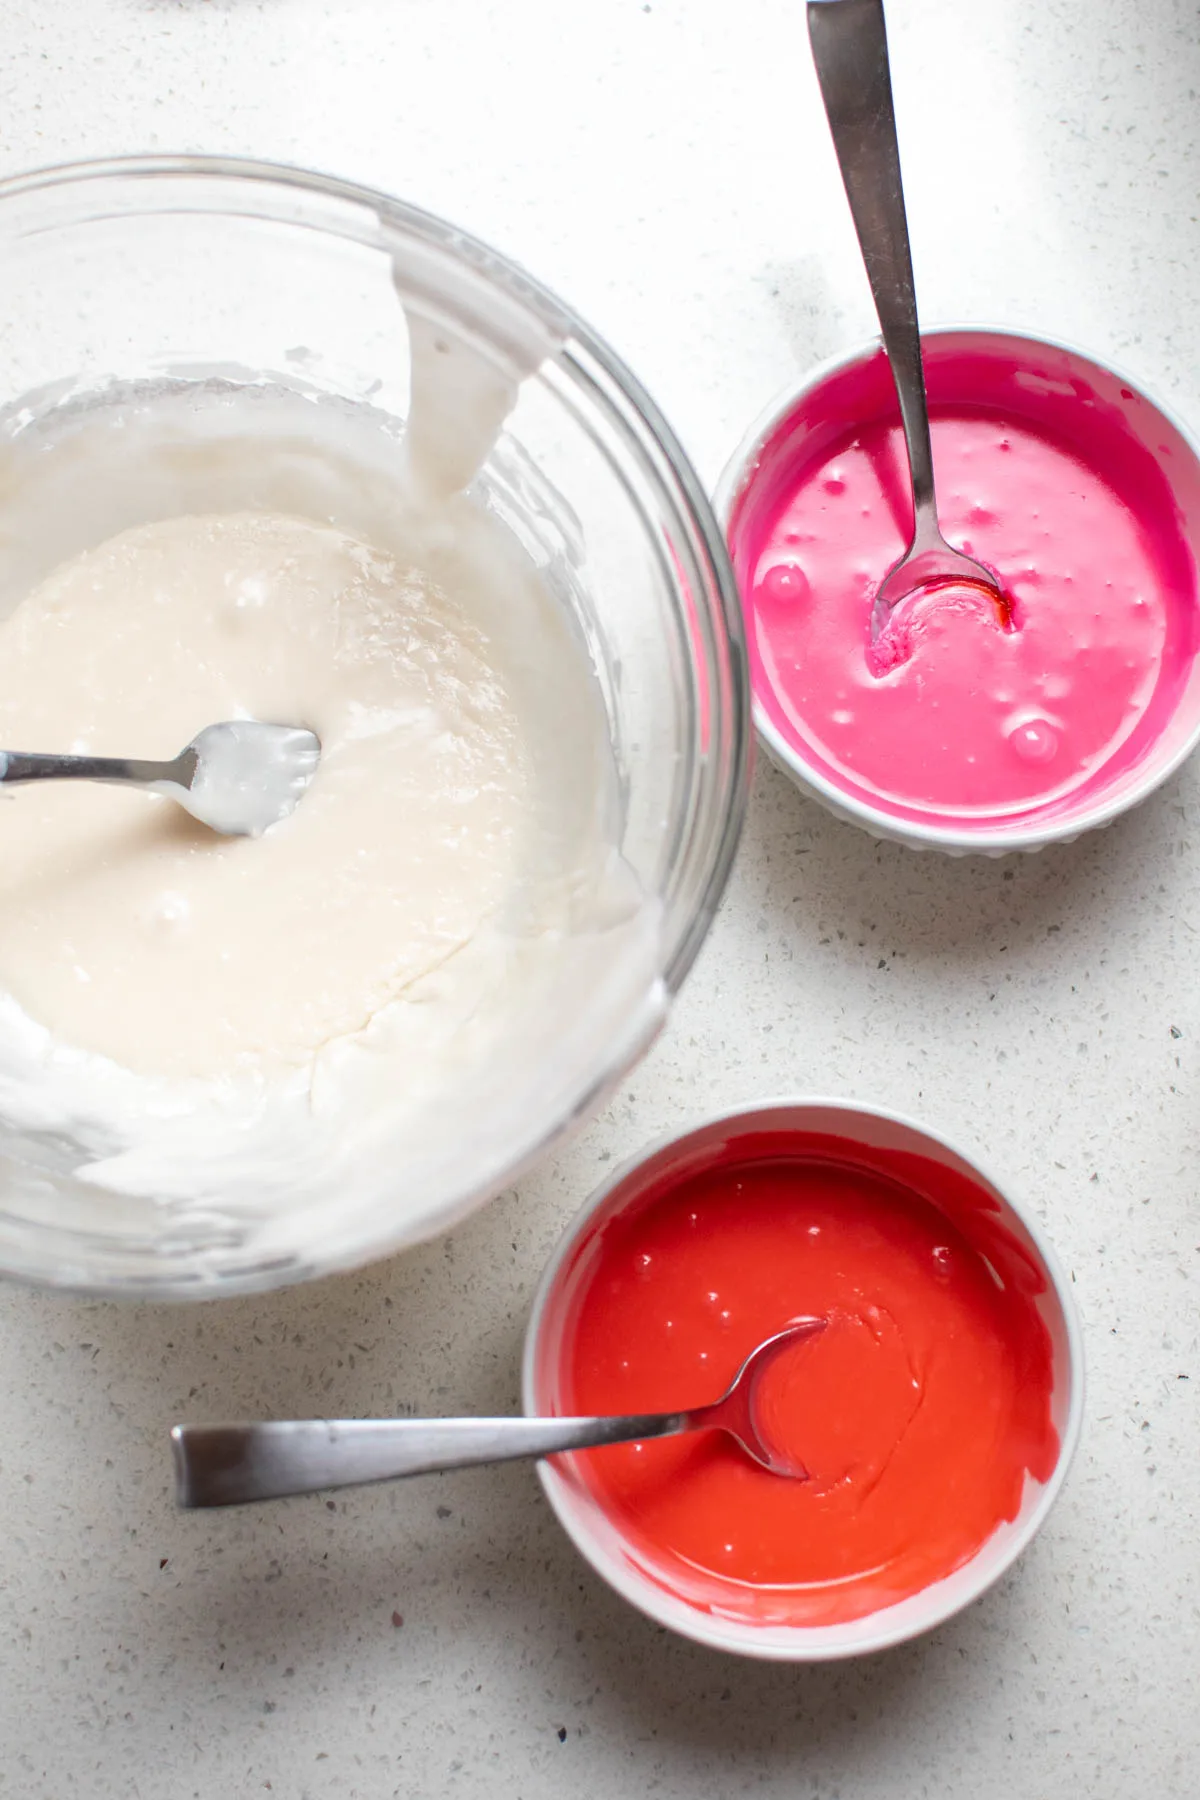 Bowls of white, pink, and red powdered sugar glaze and spoons on quartz counter.